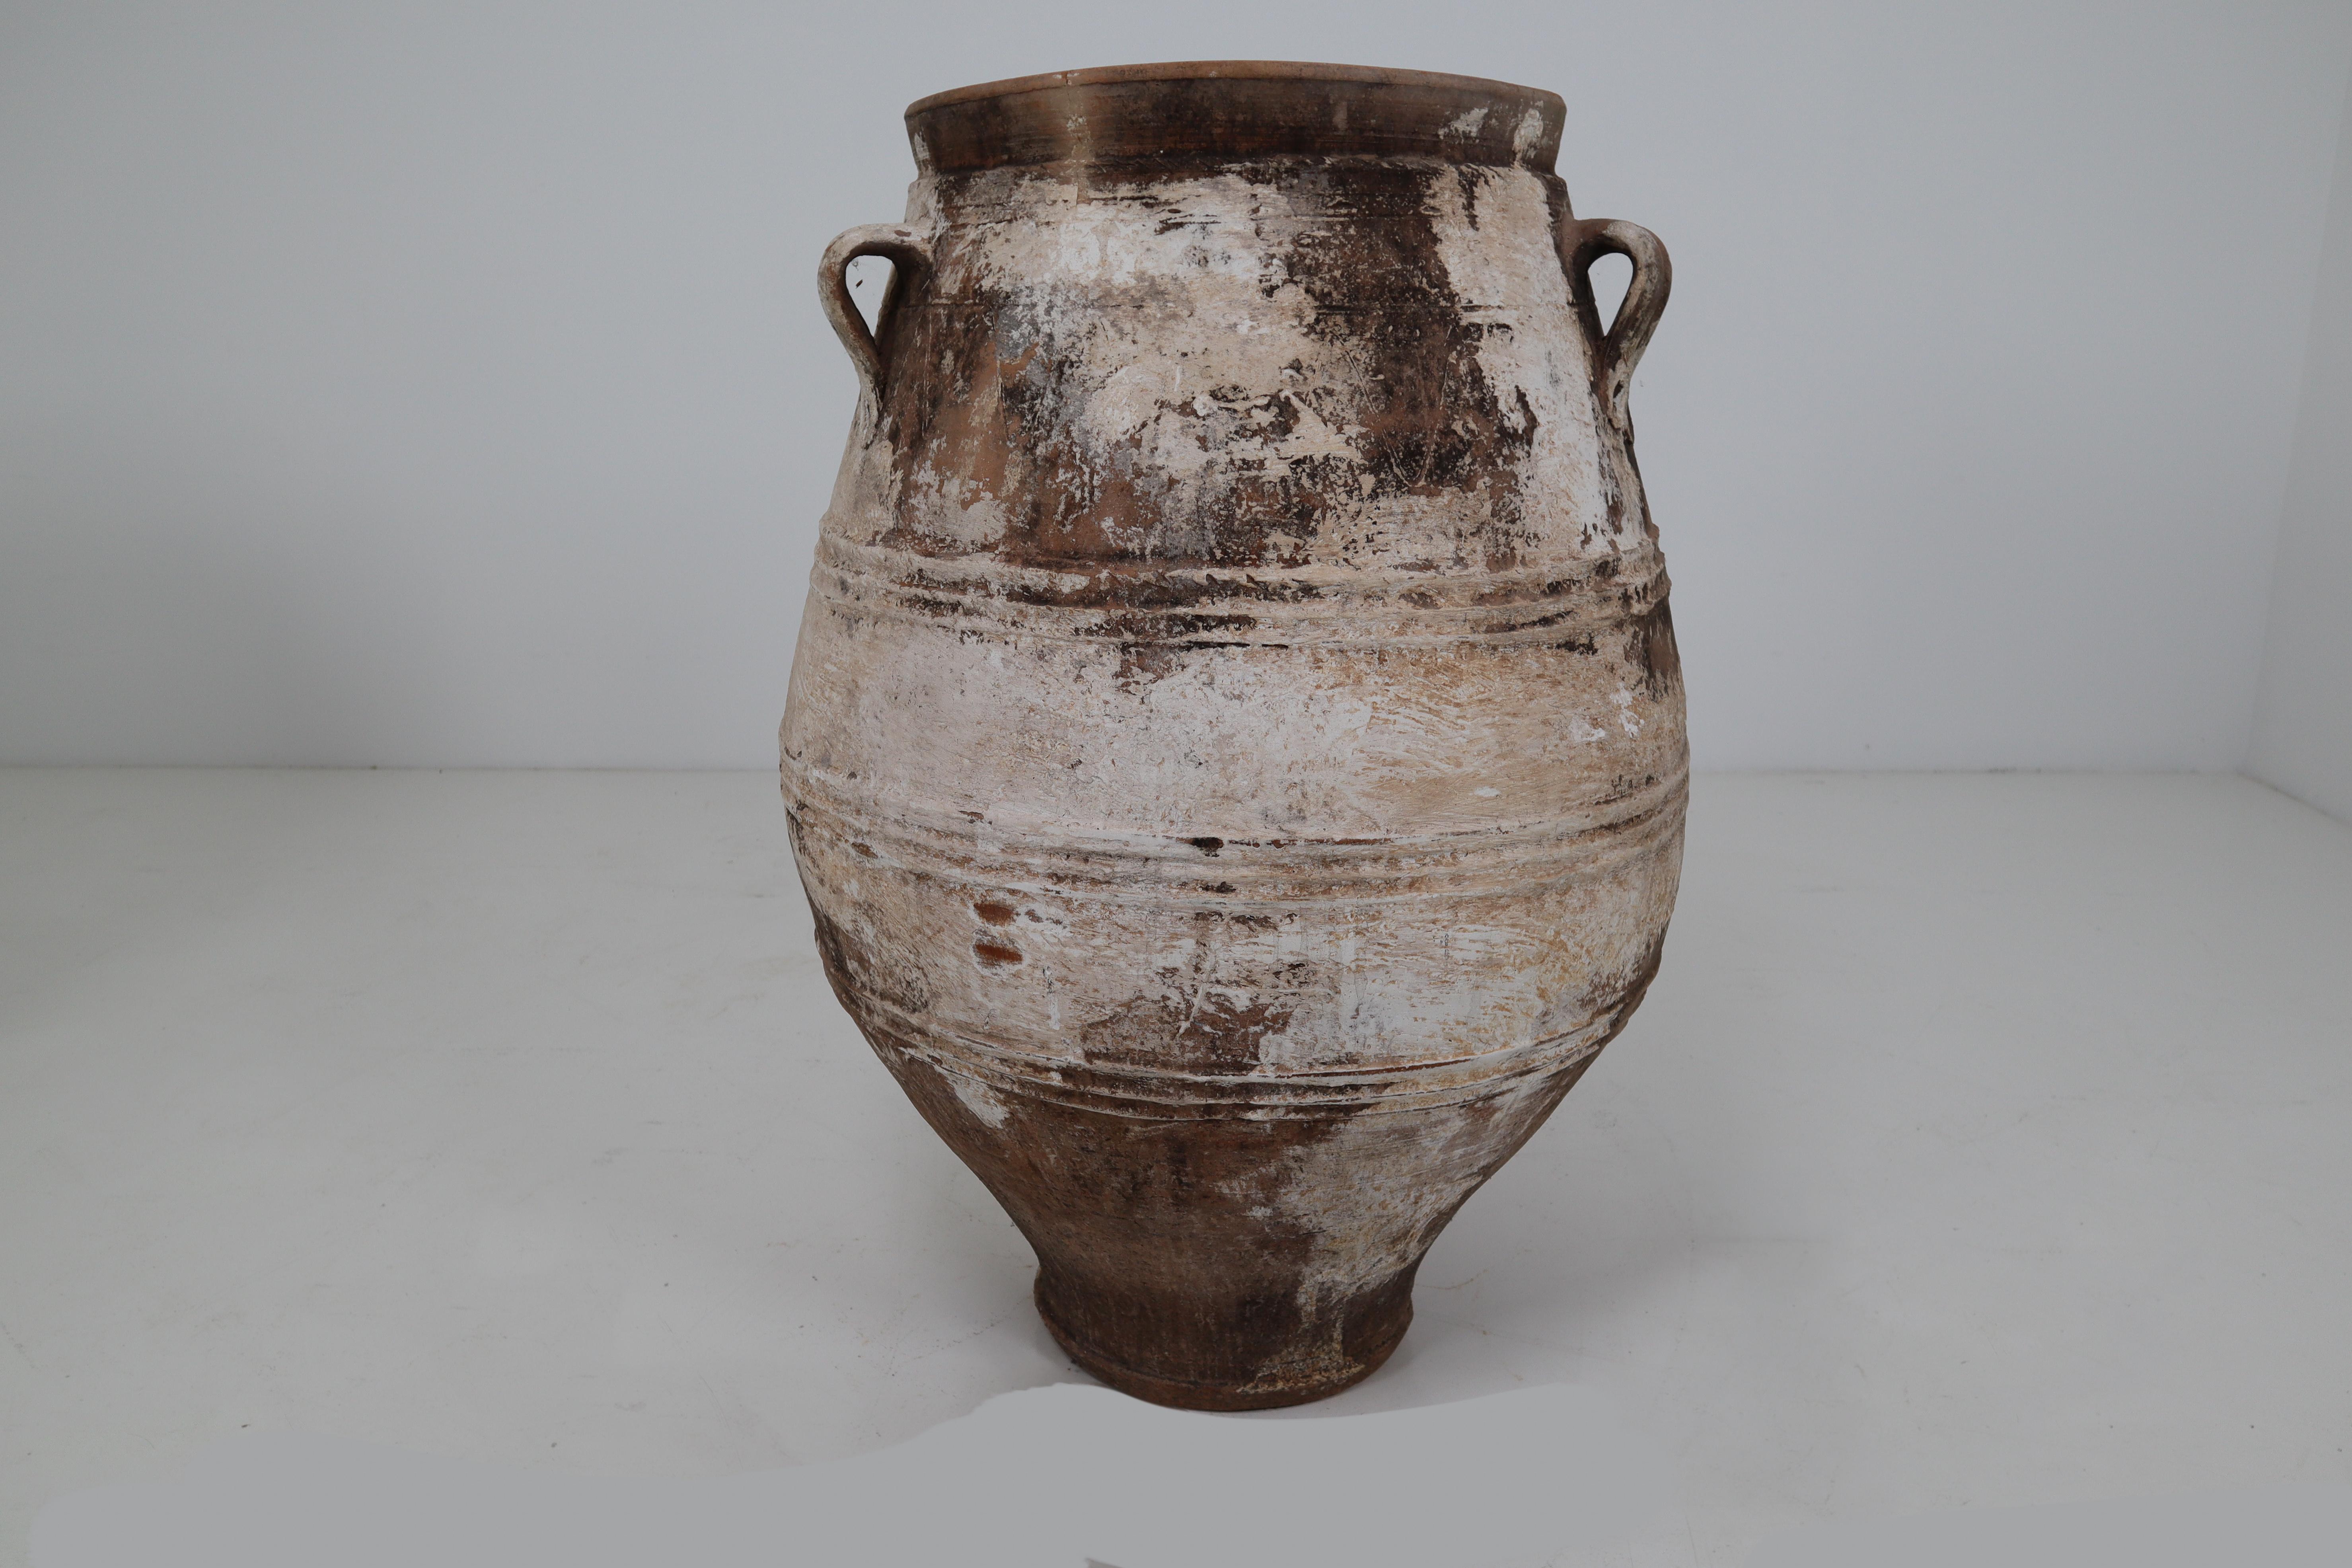 A large vintage three-handled painted terracotta urn from early 20th century Greece, with white finish and rounded belly. Picture this large 1900s urn in its former life, on a shaded terrace under an olive tree overlooking the Mediterranean Sea in